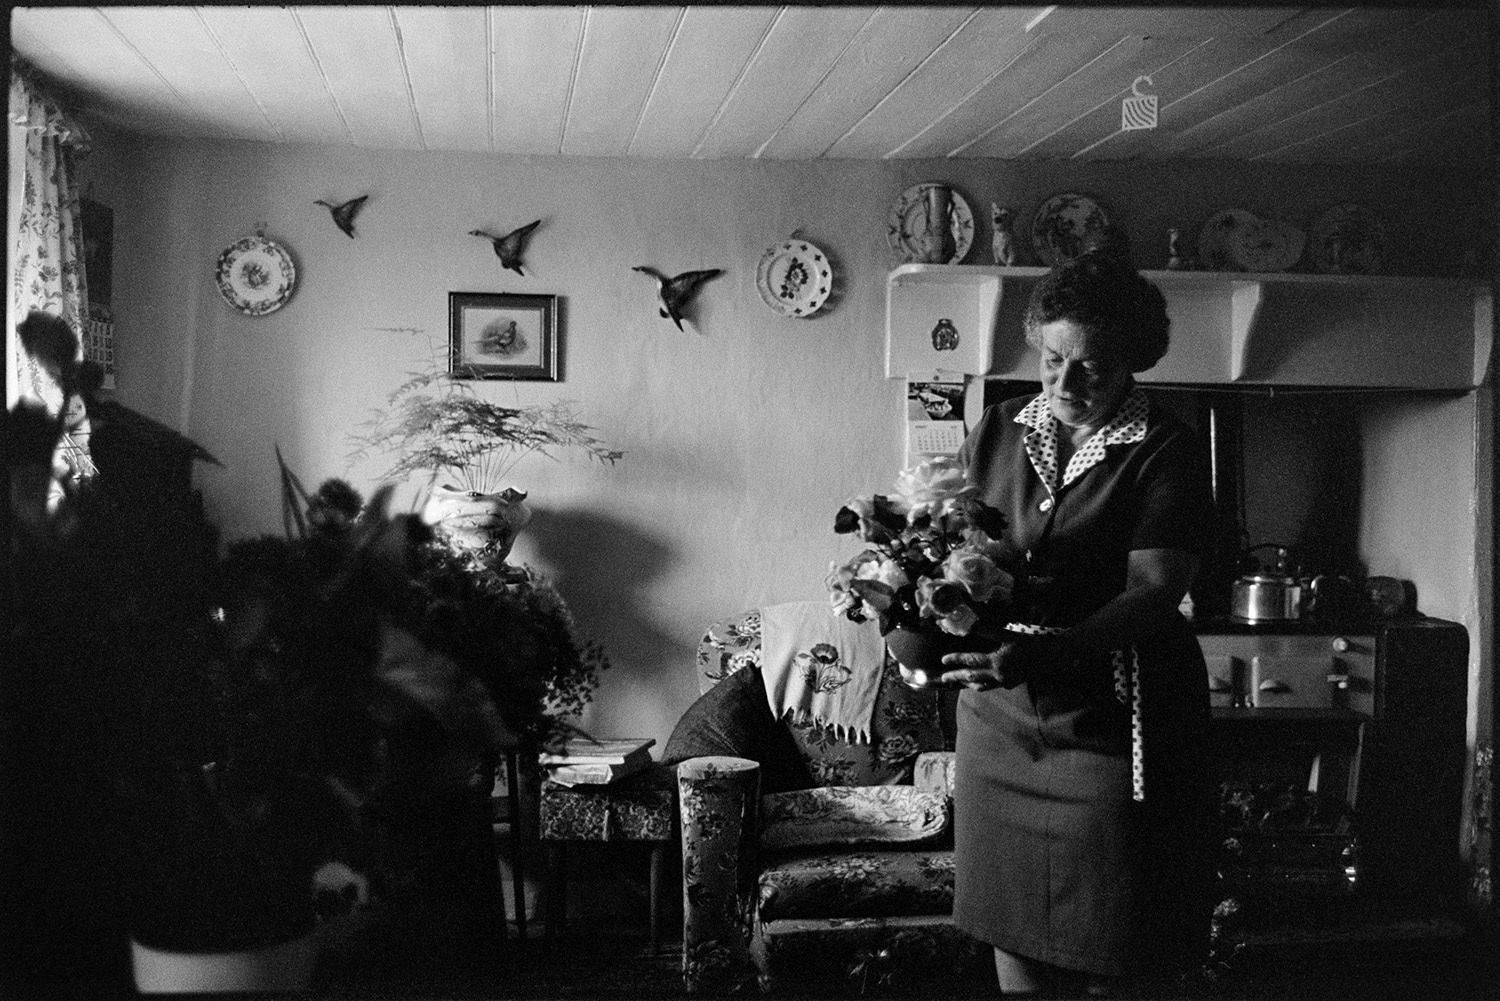 Cottage interior, woman with flowers and sitting at doorway getting ready for show. 
[Mrs Piper in her house at Upcott, Dolton. She is holding a vase of flowers, ready for Dolton Flower Show. An armchair, rayburn stove and mantelpiece with a display of china can be seen in the background. Ornamental china flying ducks are also decorating the wall.]